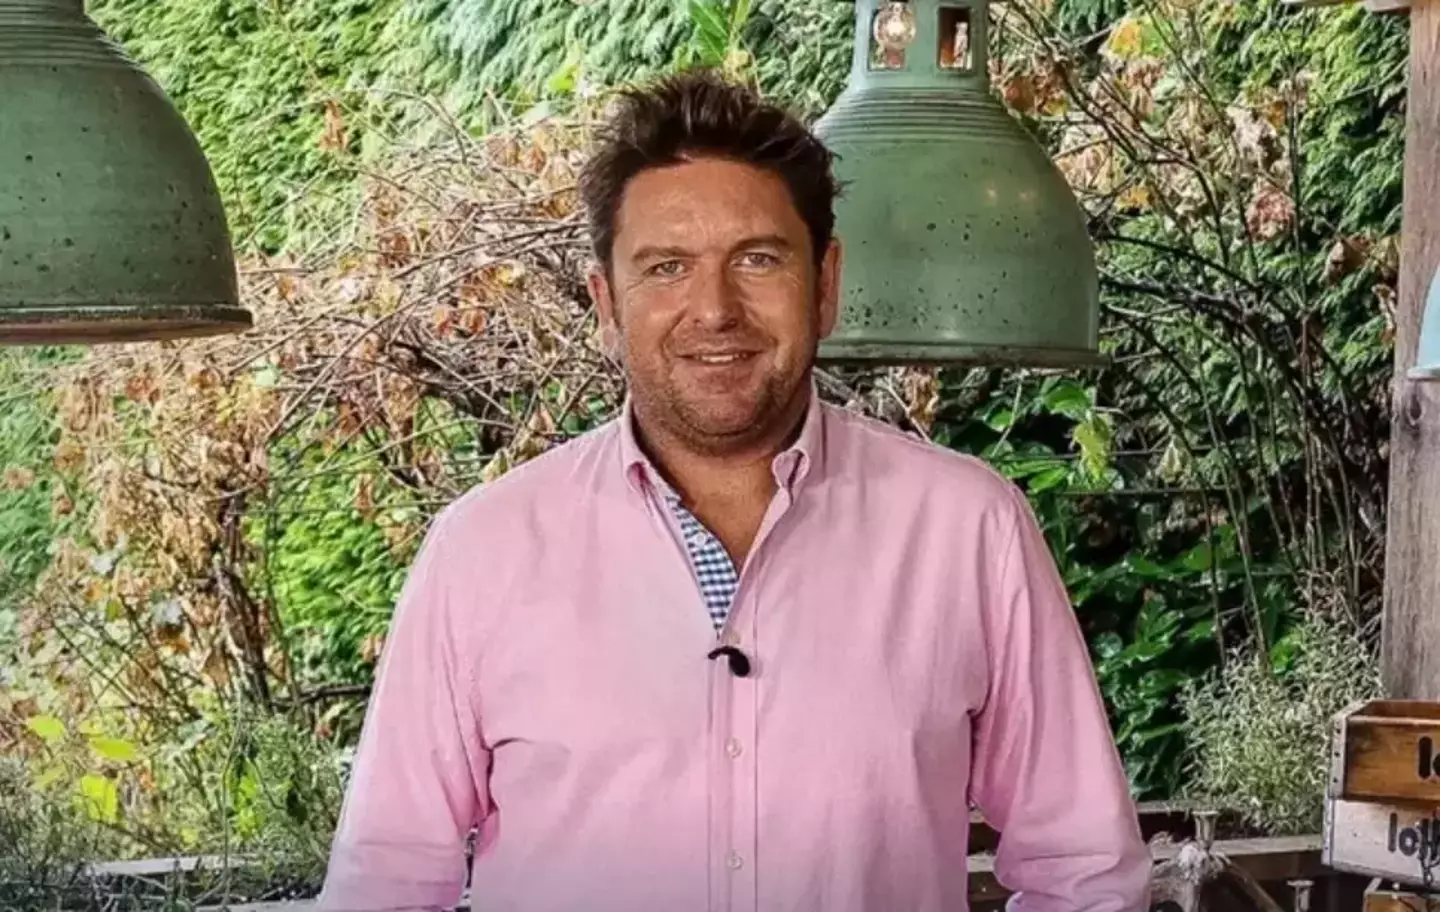 James Martin has been a regular on our screens as a TV chef.